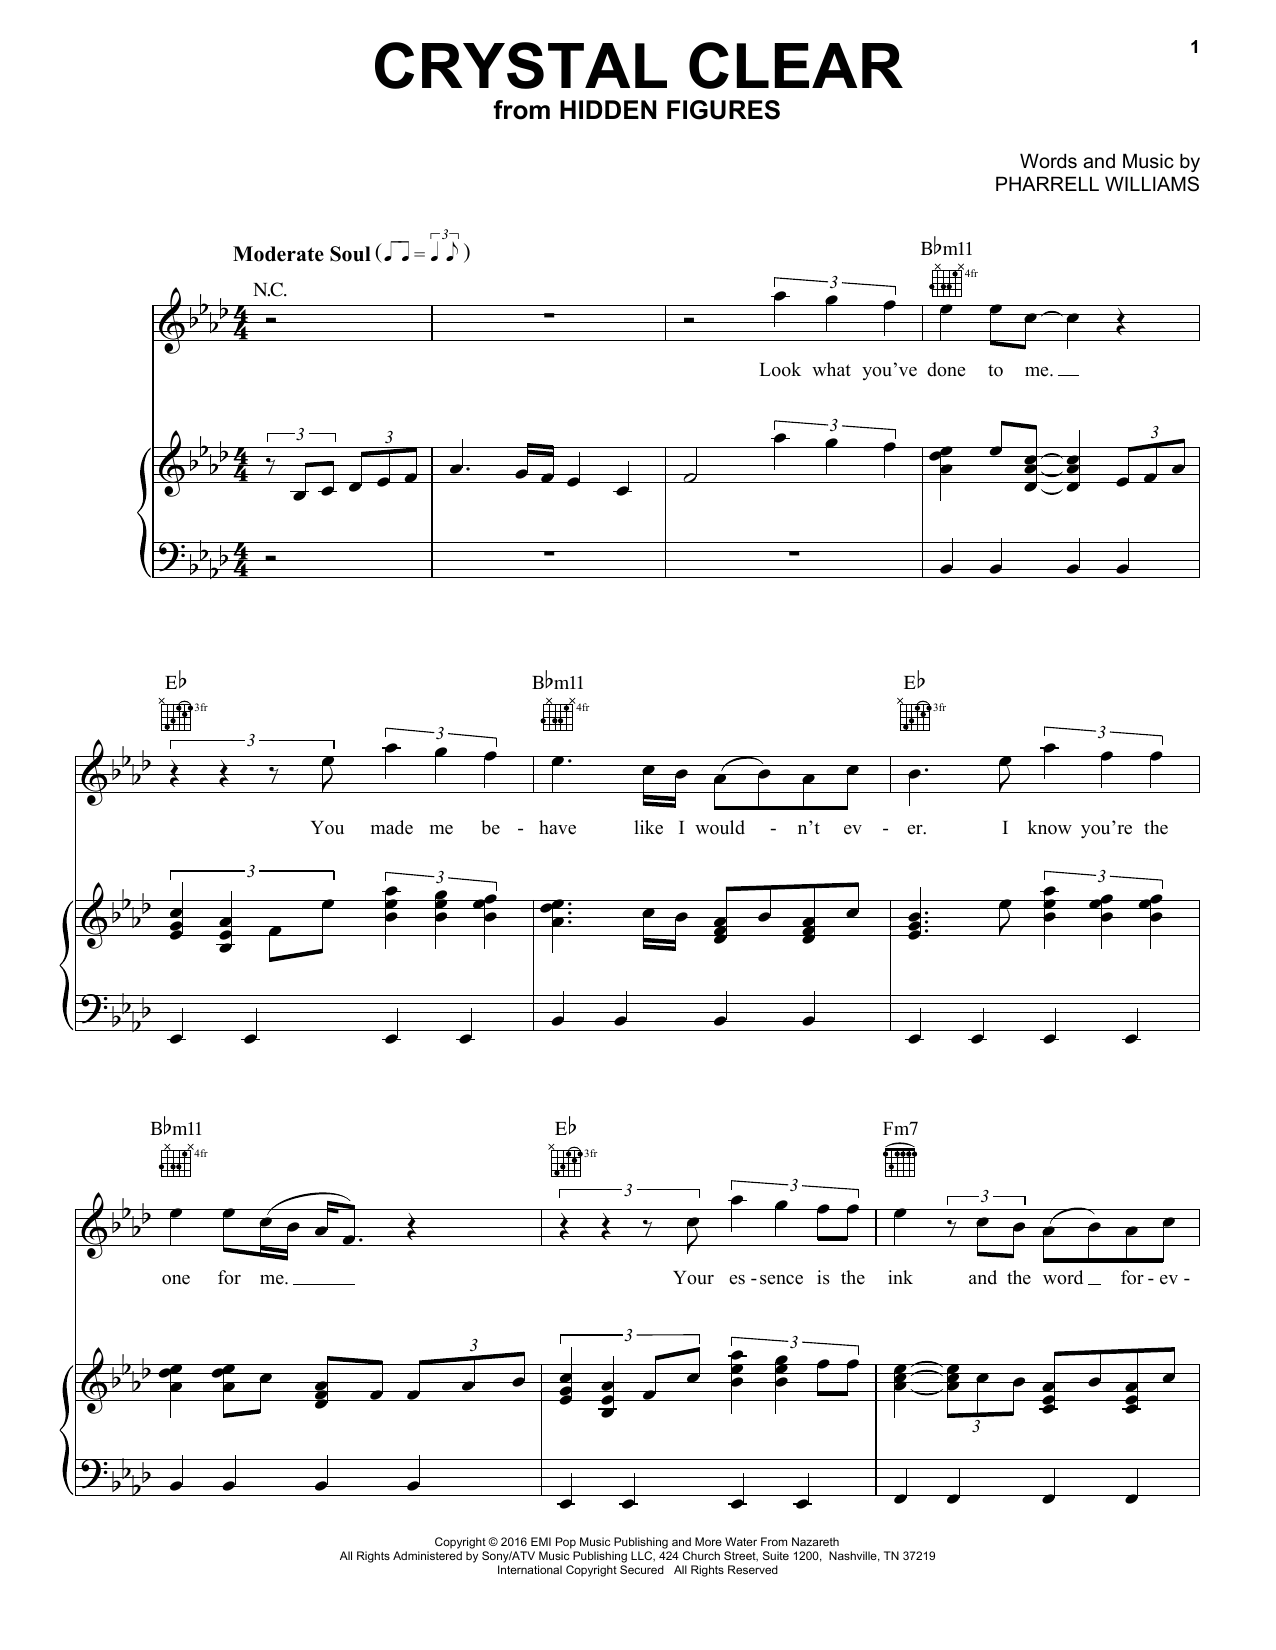 Download Pharrell Williams Crystal Clear Sheet Music